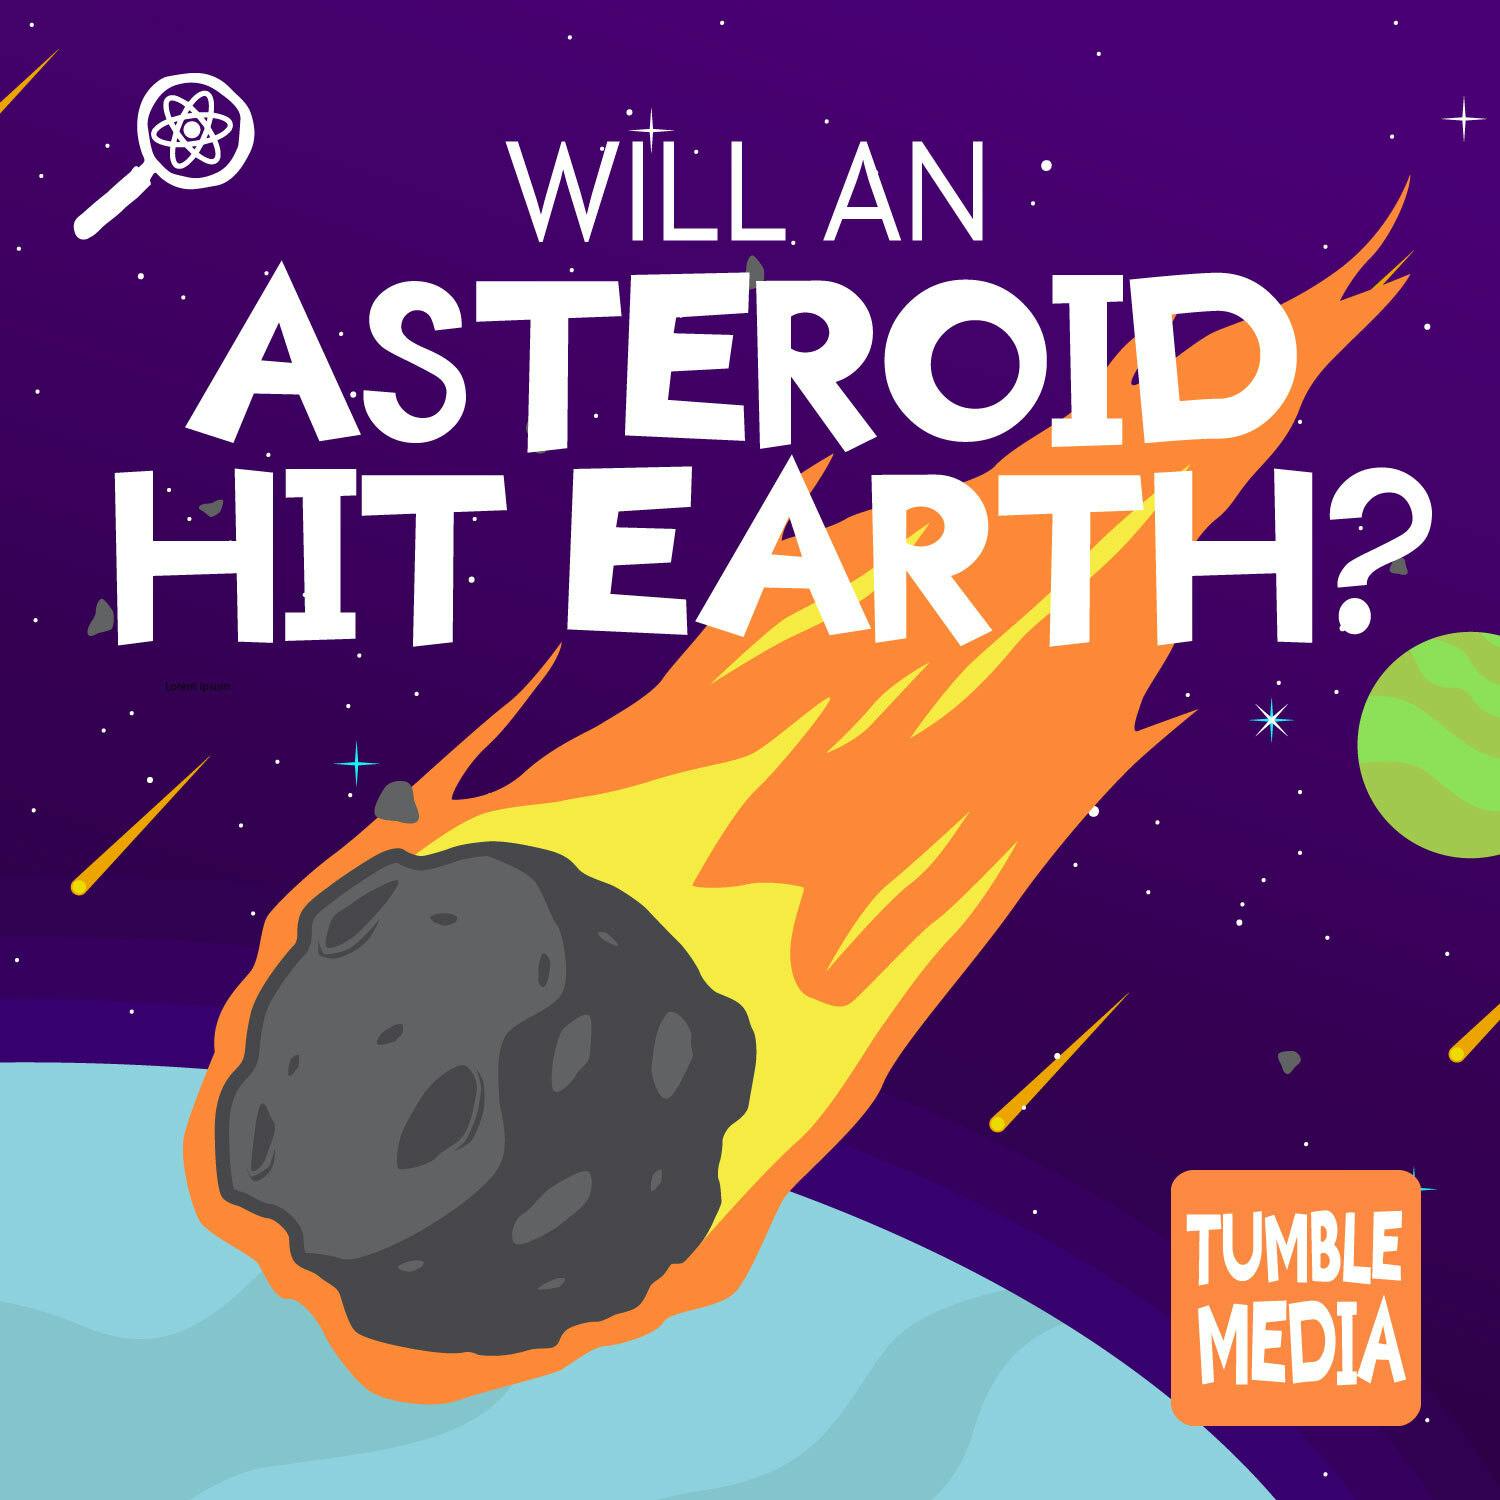 Will An Asteroid Hit Earth?